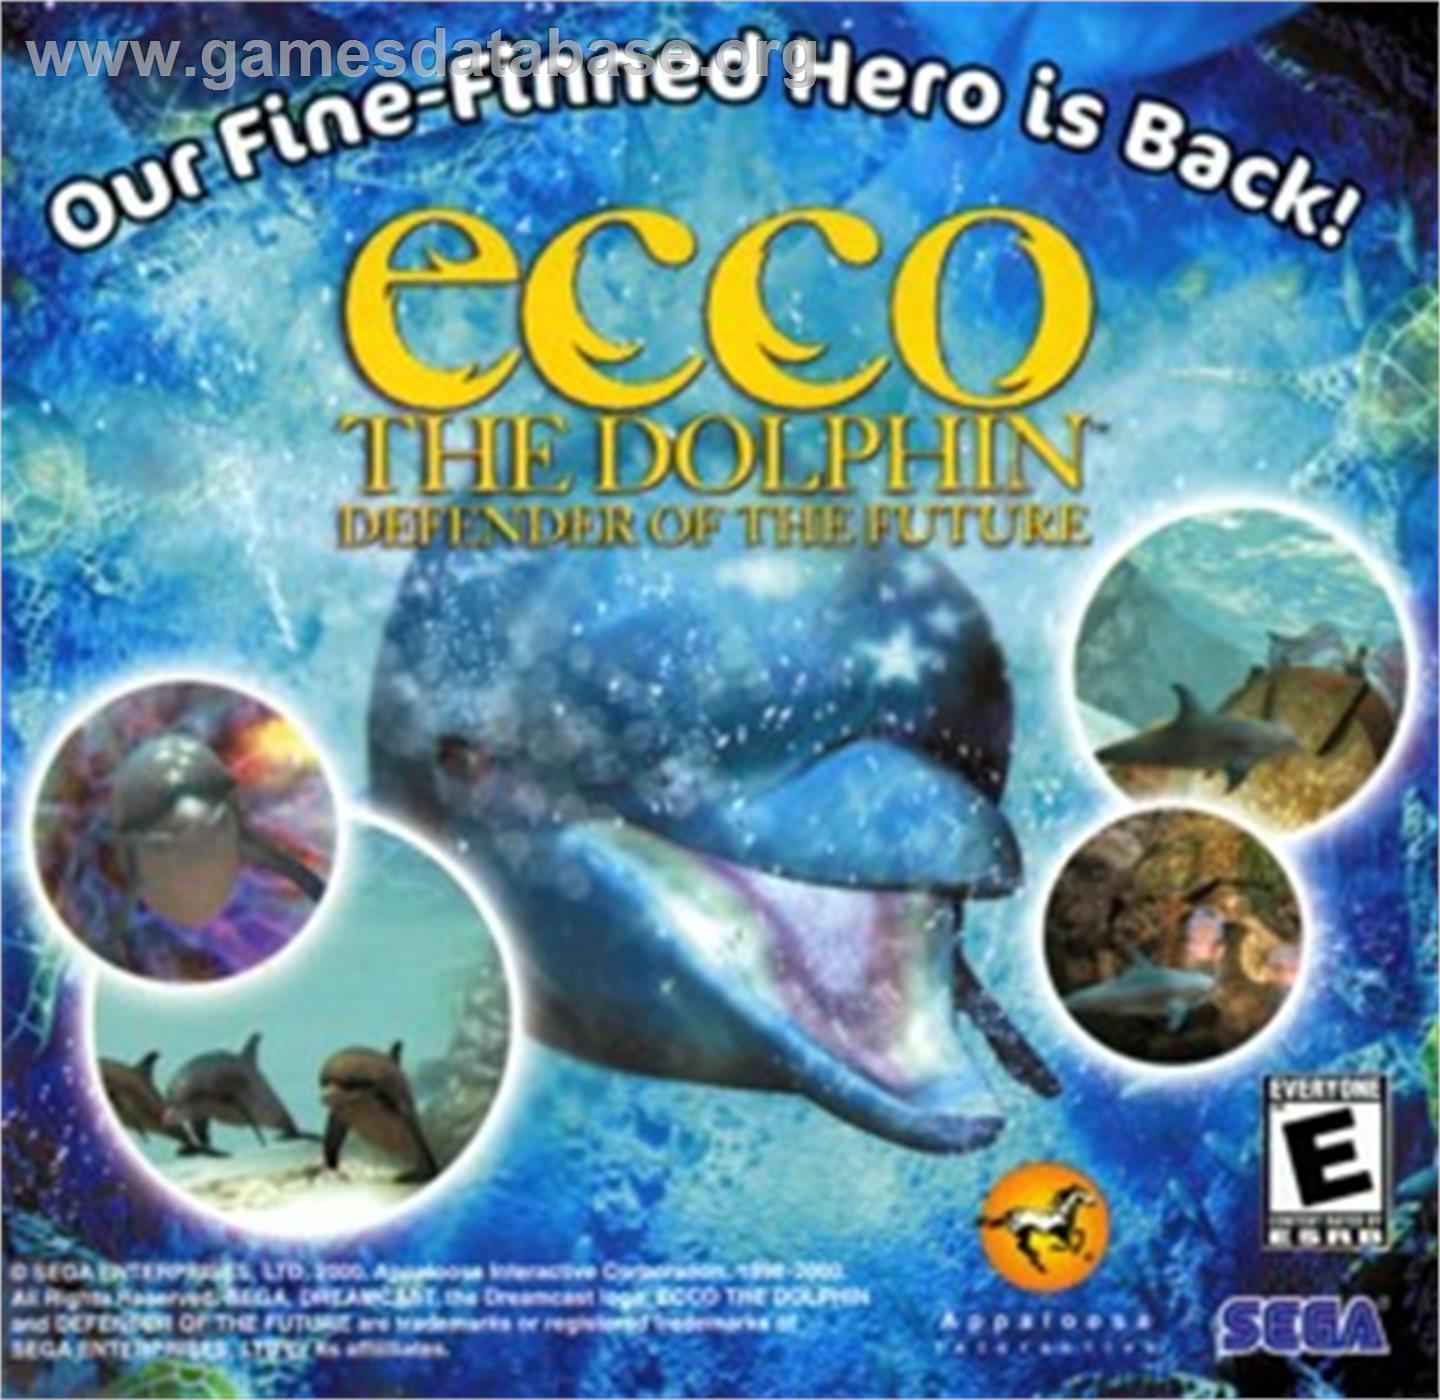 Ecco the Dolphin: Defender of the Future - Sony Playstation 2 - Artwork - Advert